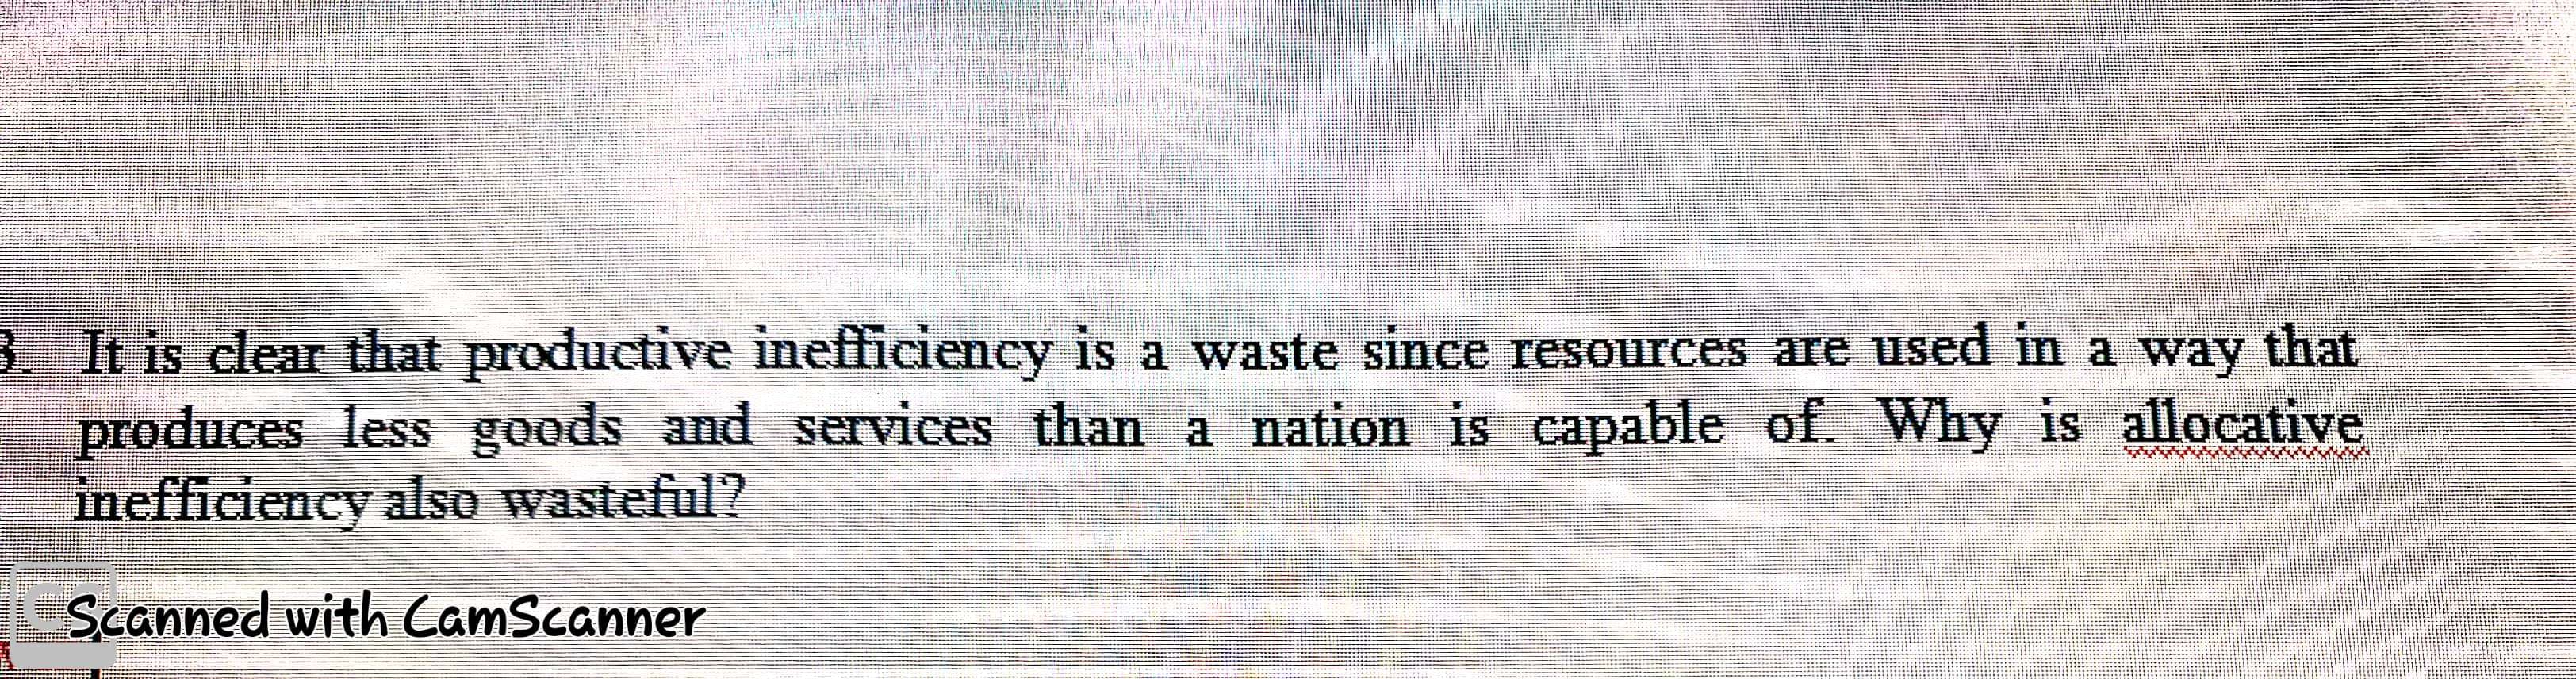 clear that productive inefficiency is a waste since reSOurces are used in a way that
produces less goods and services than a nätion is eapable of Why is allocative
mefficiency alse wasteful?
